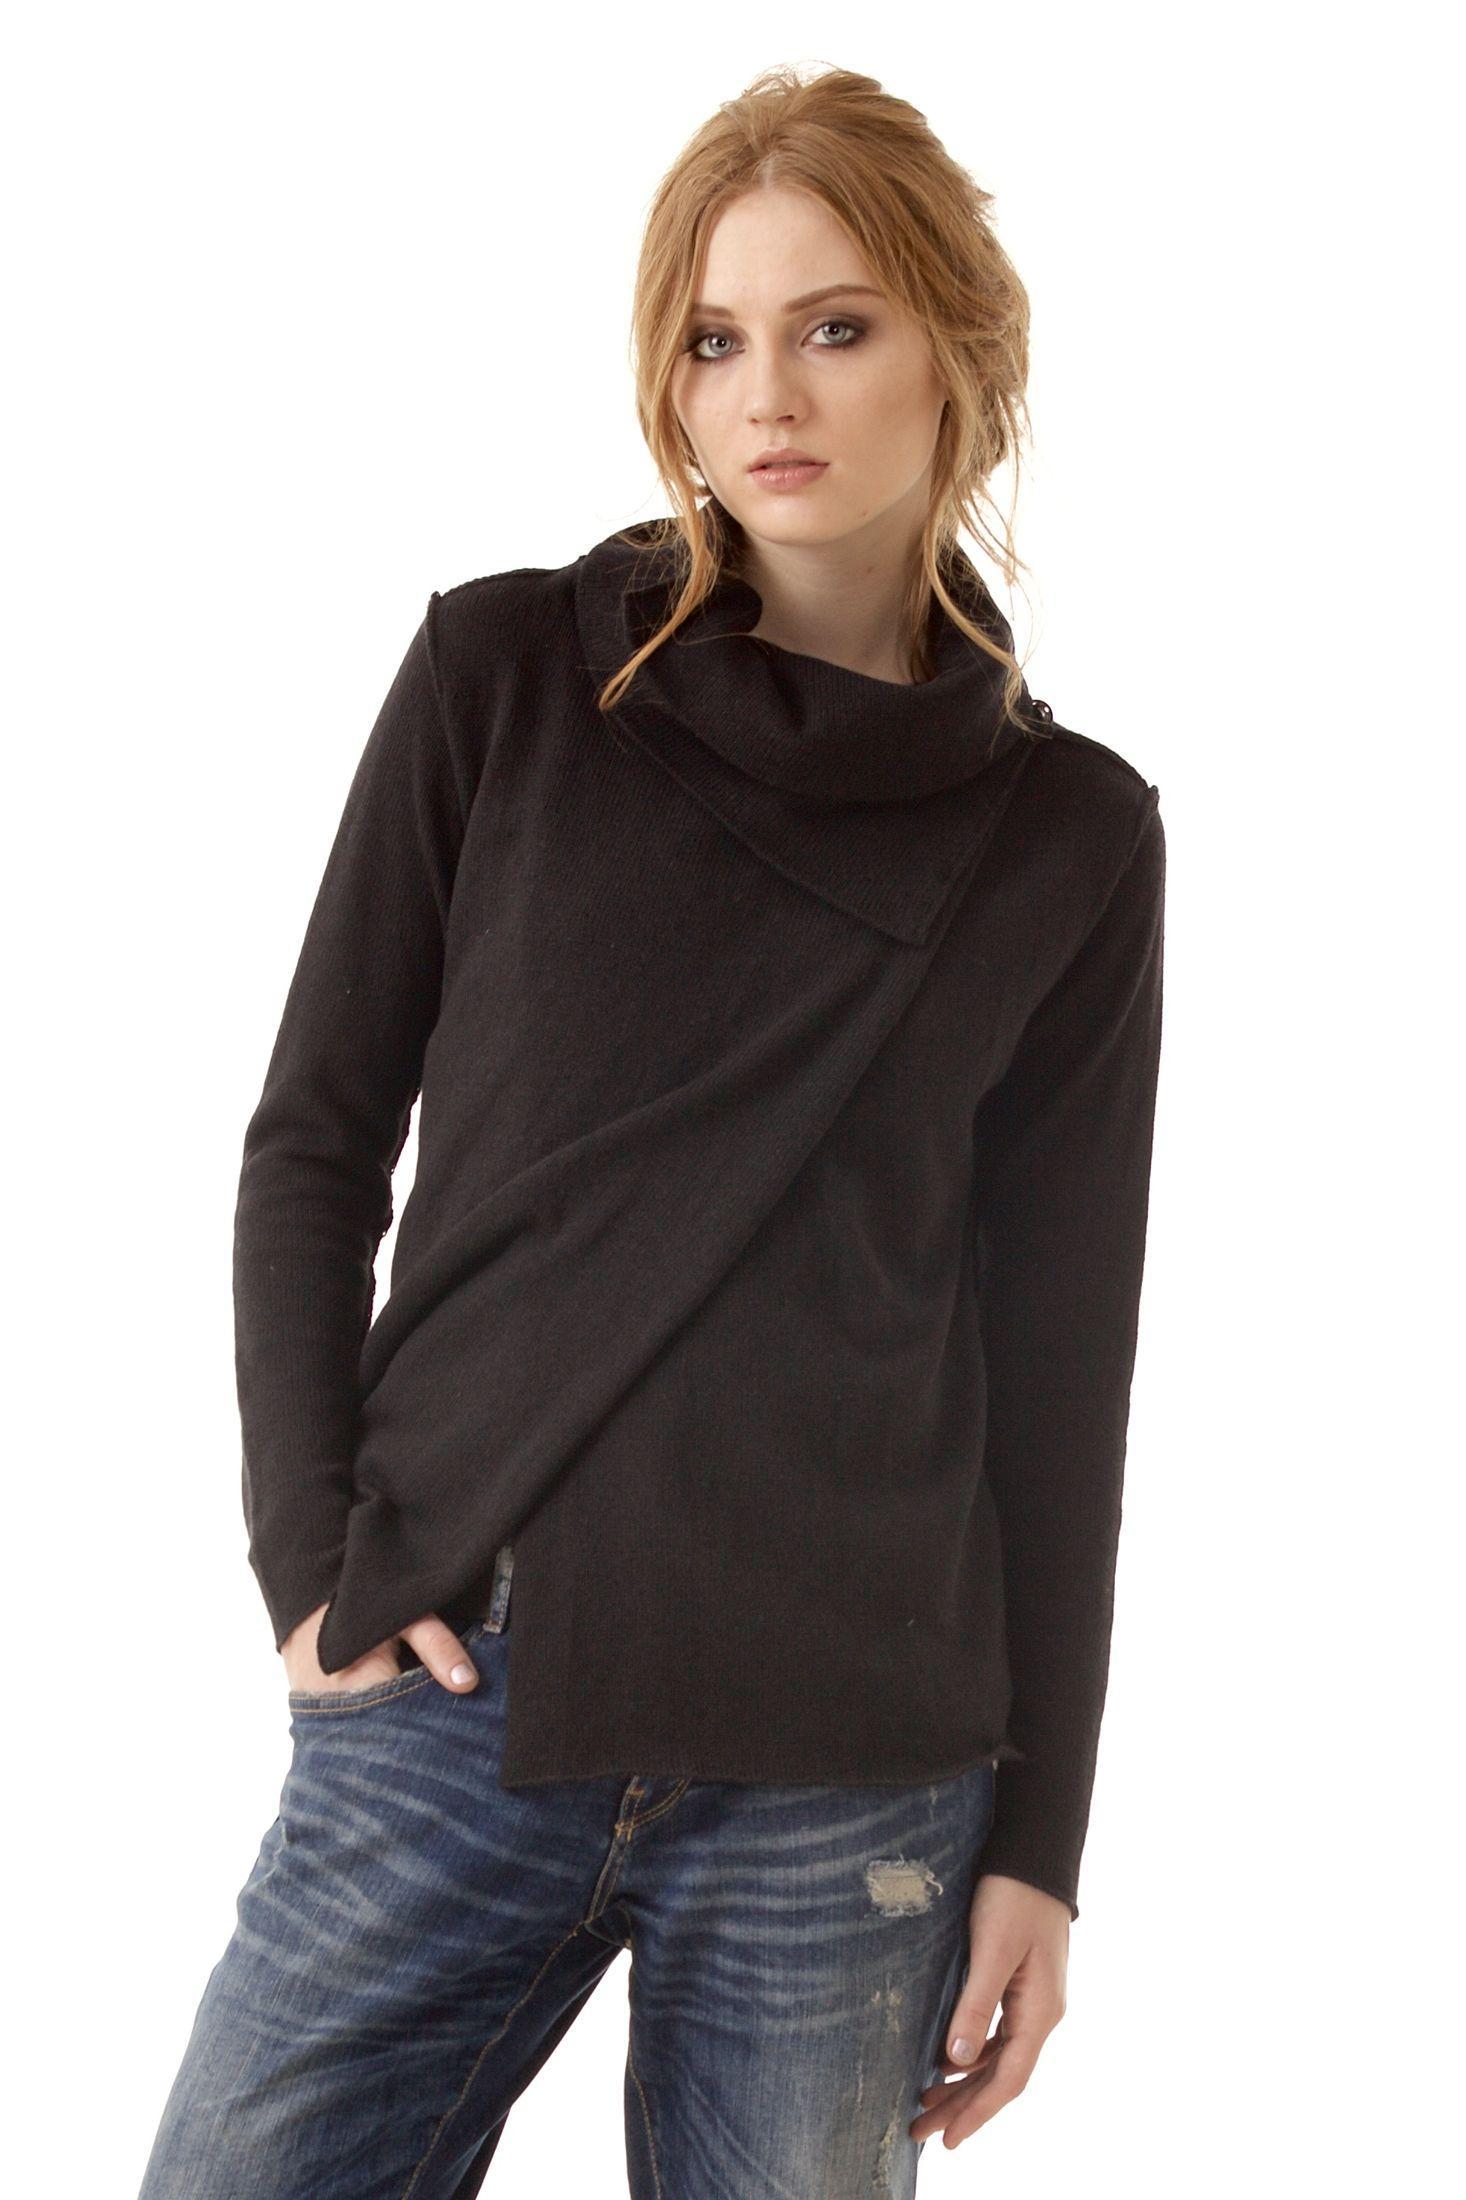 Embrace the season in style with the MELISSA Black Knit Alpaca Wool Cowl Collar Cardigan – a versatile and fashionable layer crafted for both warmth and elegance.